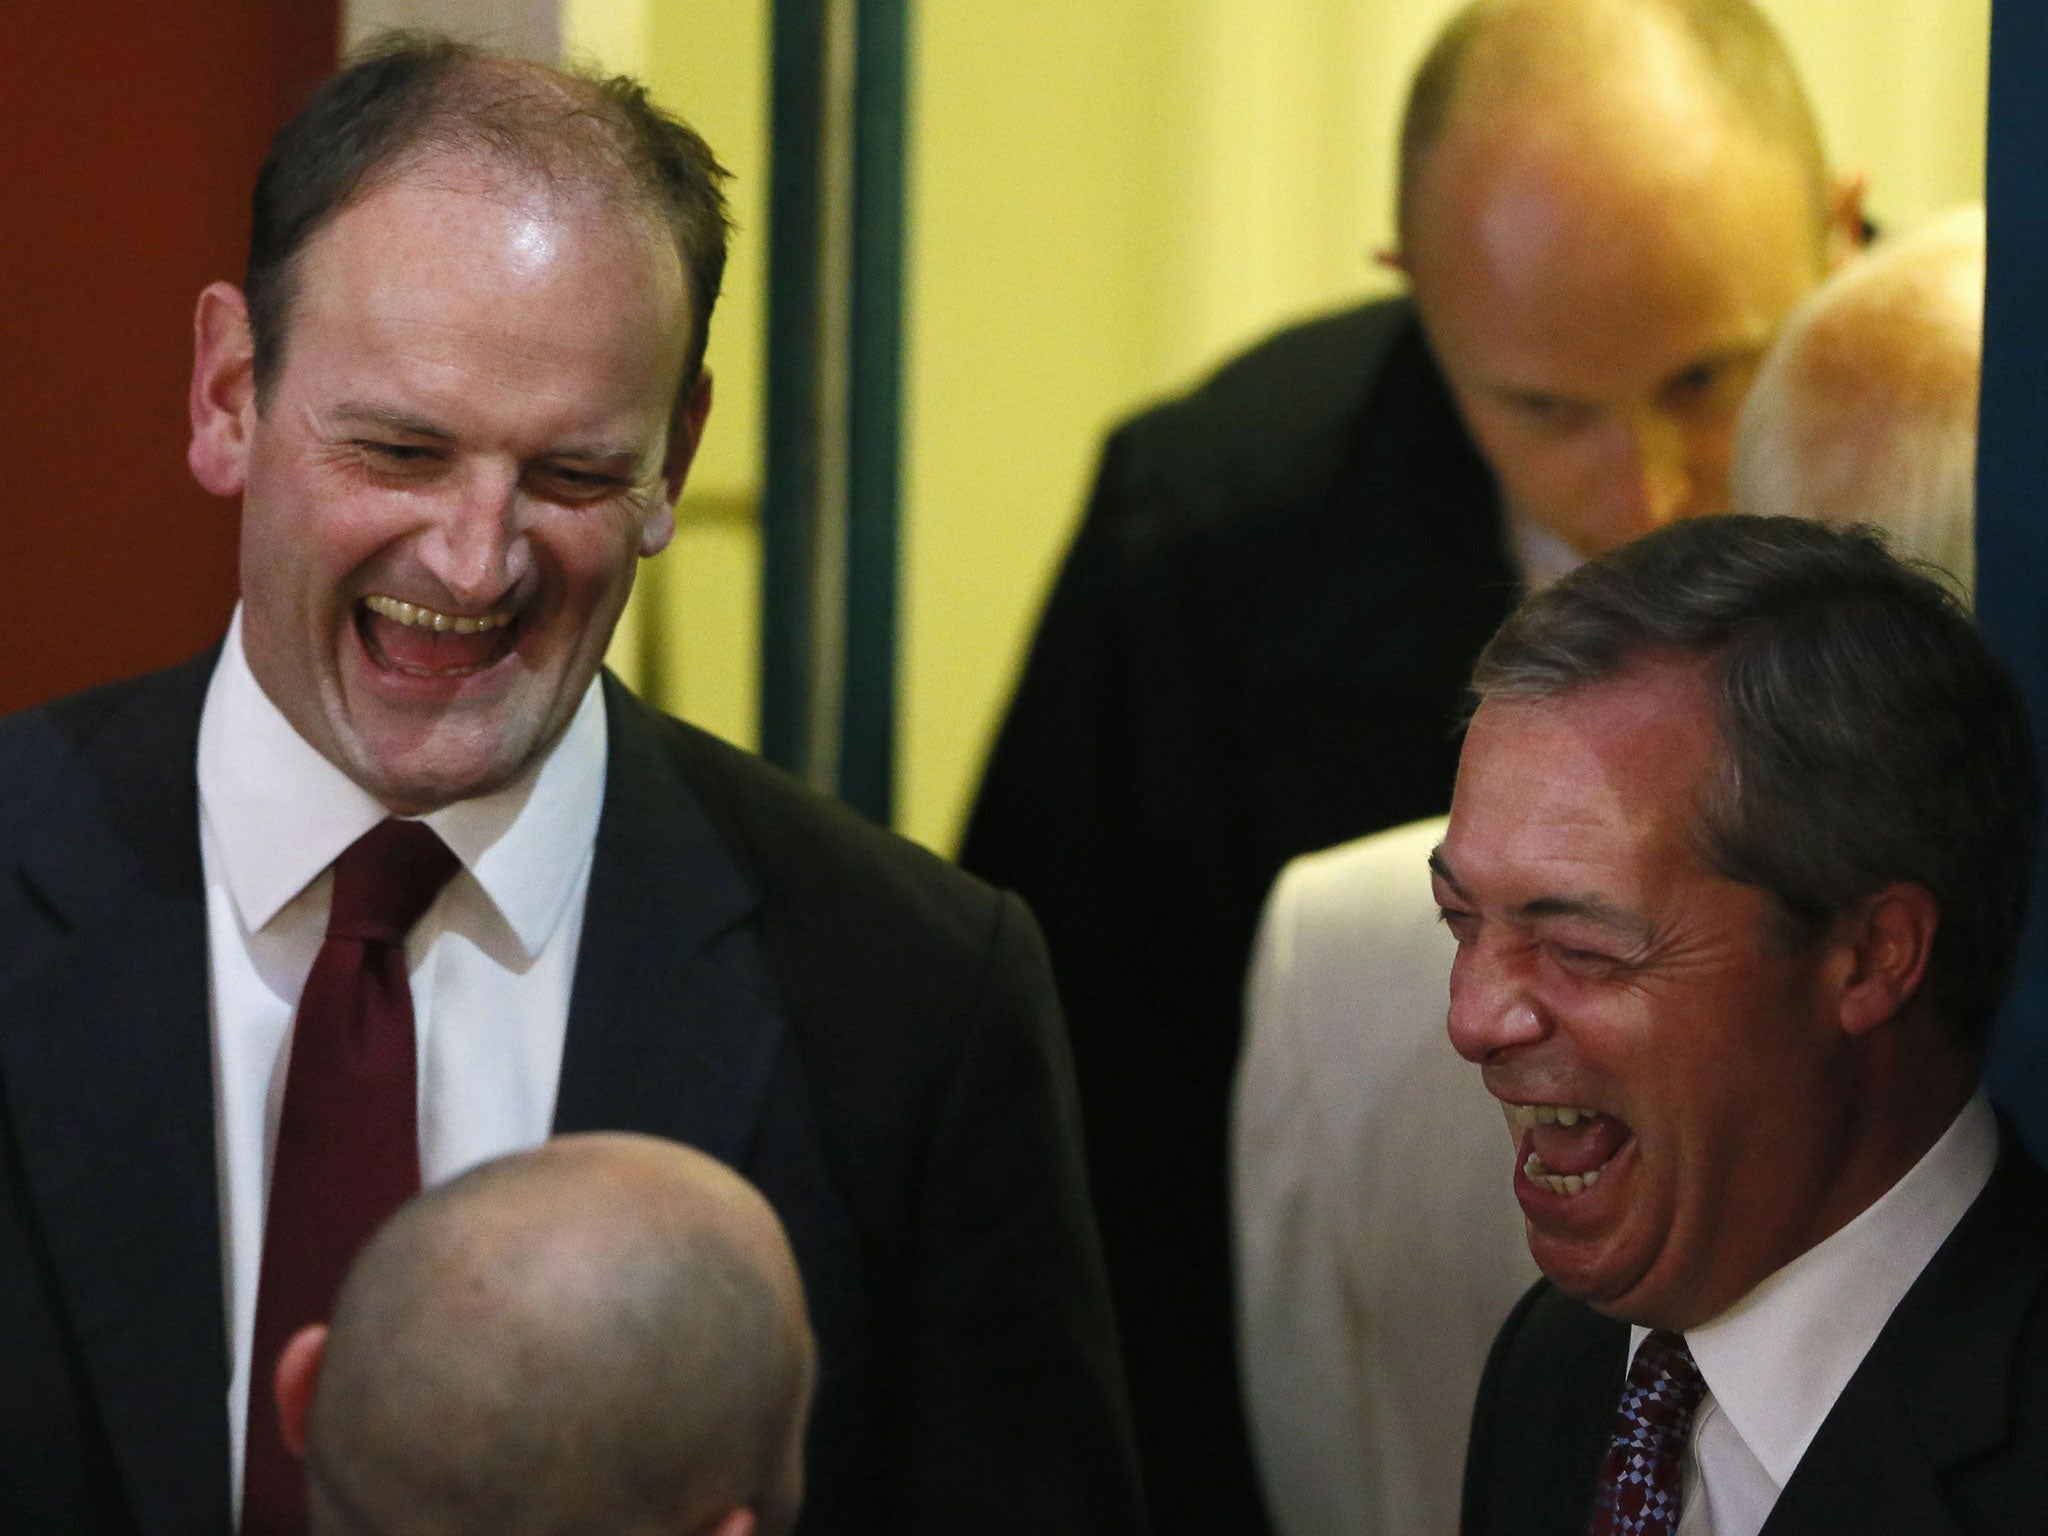 The reaction to Douglas Carswell's landslide victory carries a different sentiment outside of Clacton